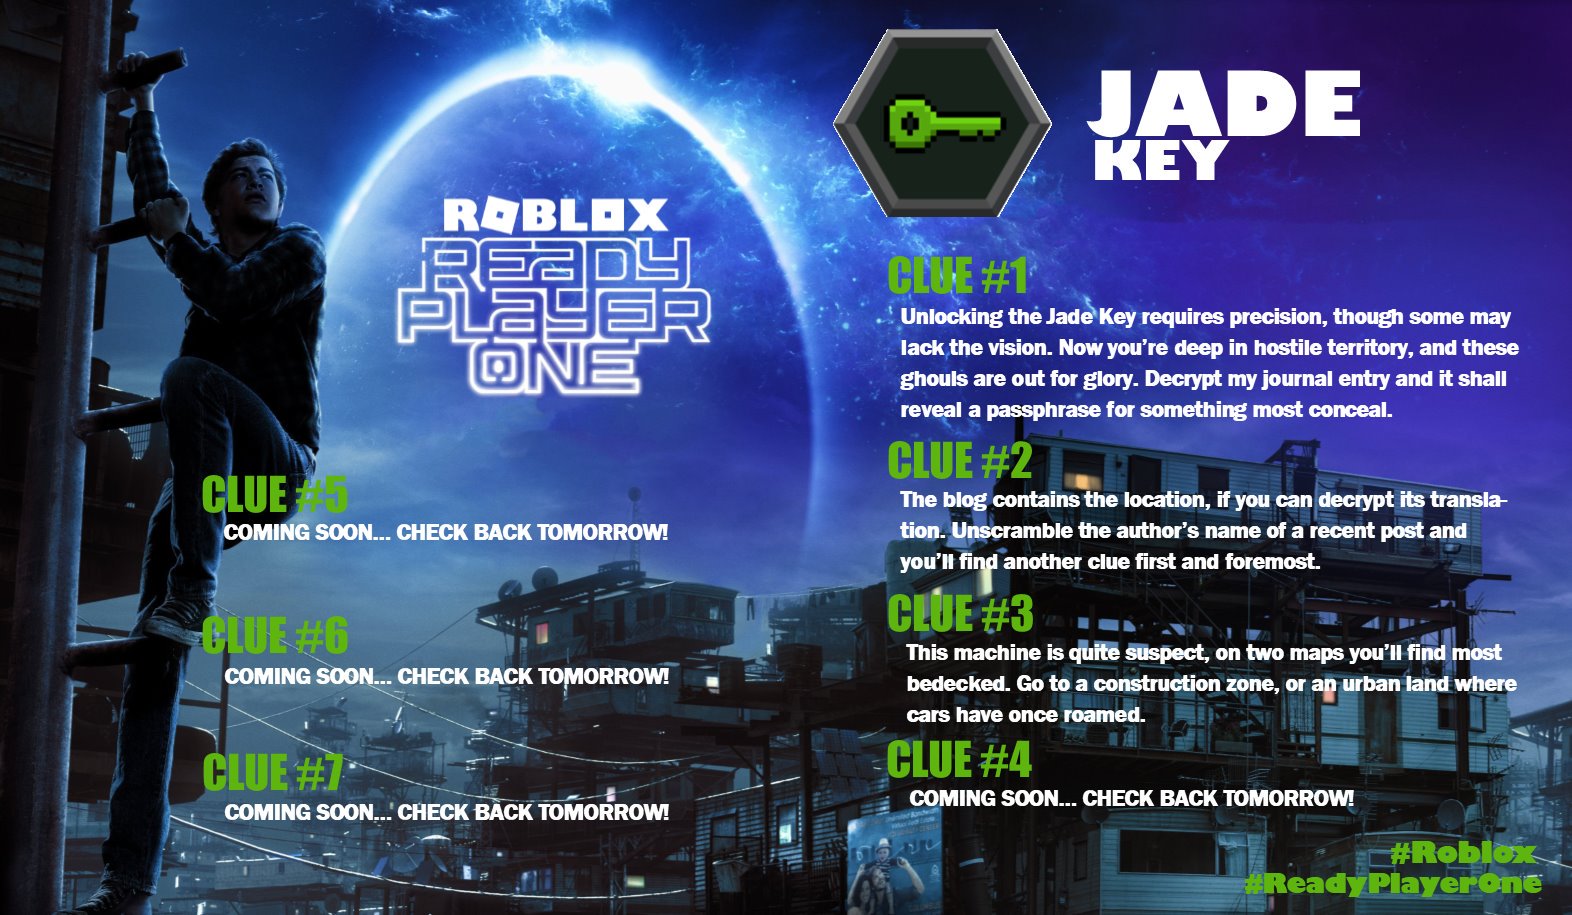 Bloxy News On Twitter Bloxynews The Current Clues For Finding The Jade Key In The Roblox Readyplayerone Event - roblox jade key location